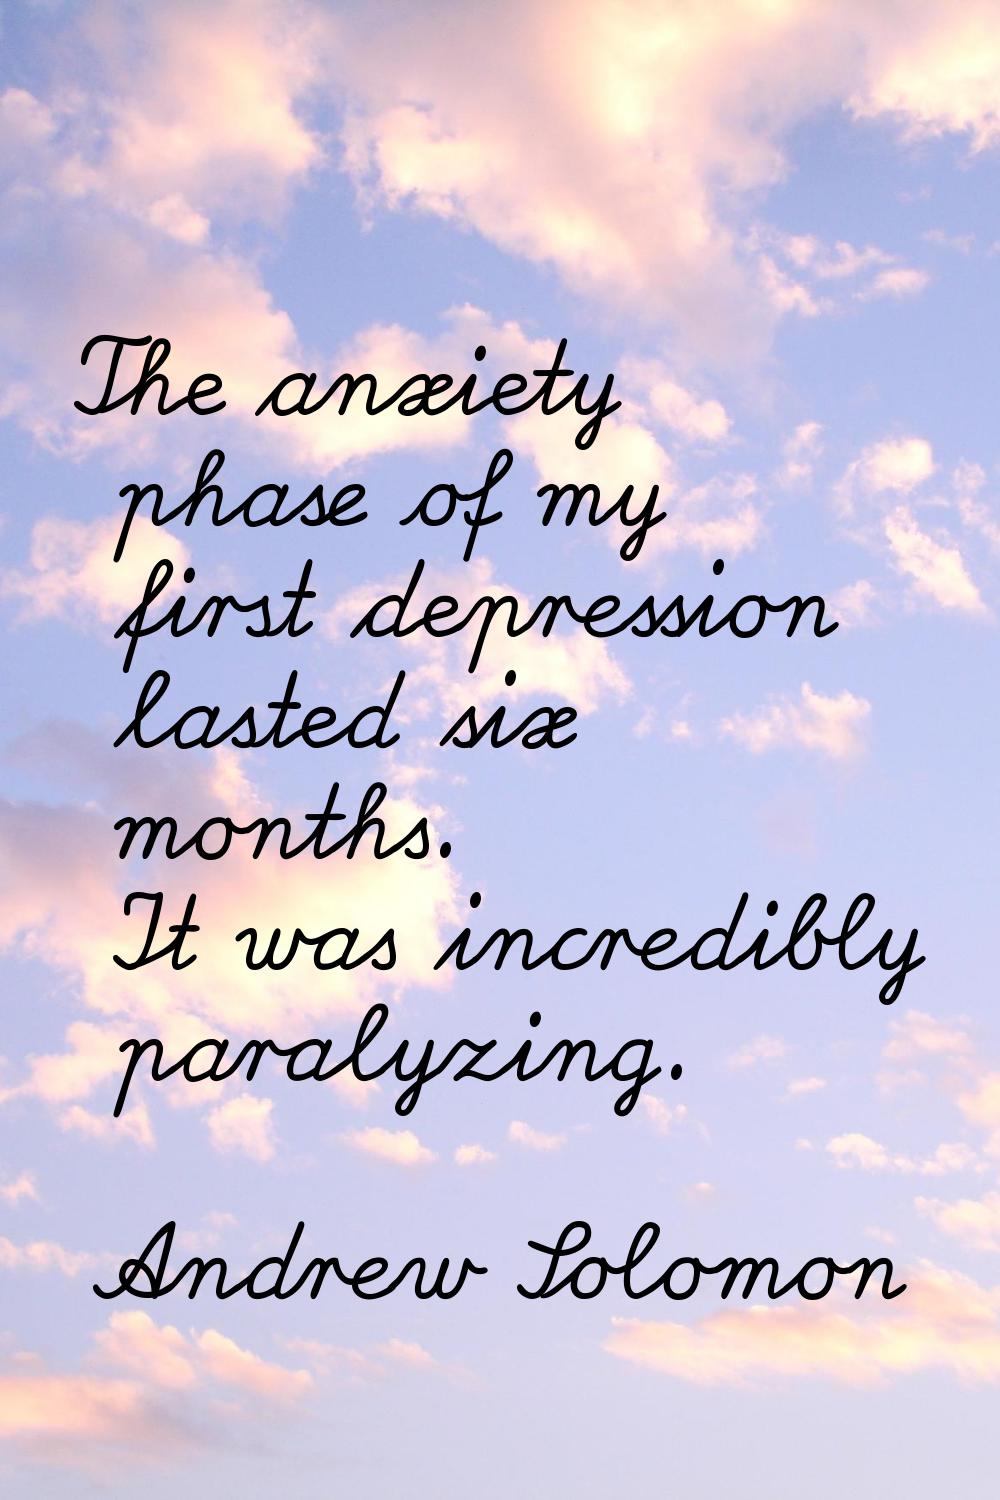 The anxiety phase of my first depression lasted six months. It was incredibly paralyzing.